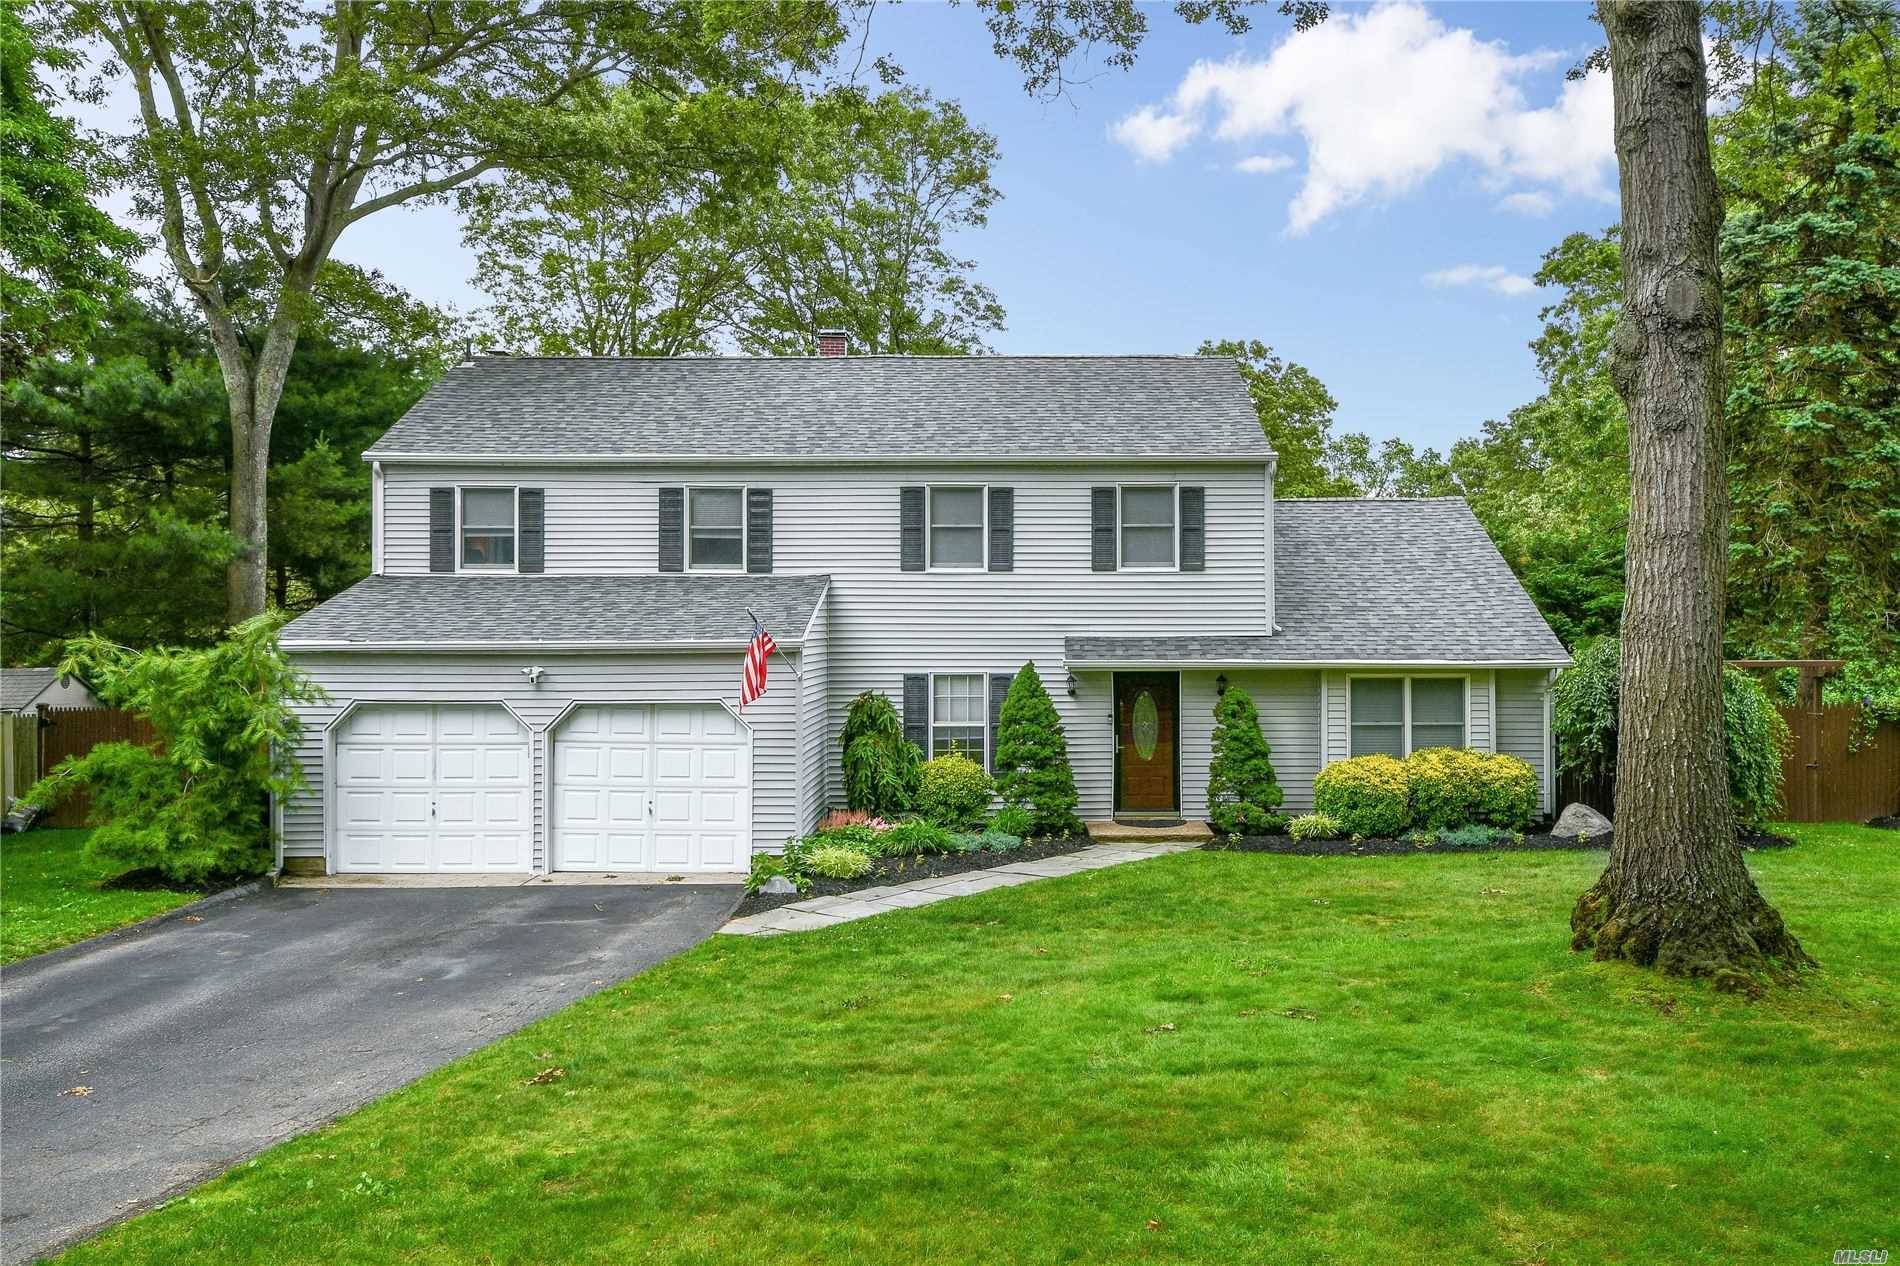 Beautifully updated and maintained Colonial on a tree lined cul de sac.